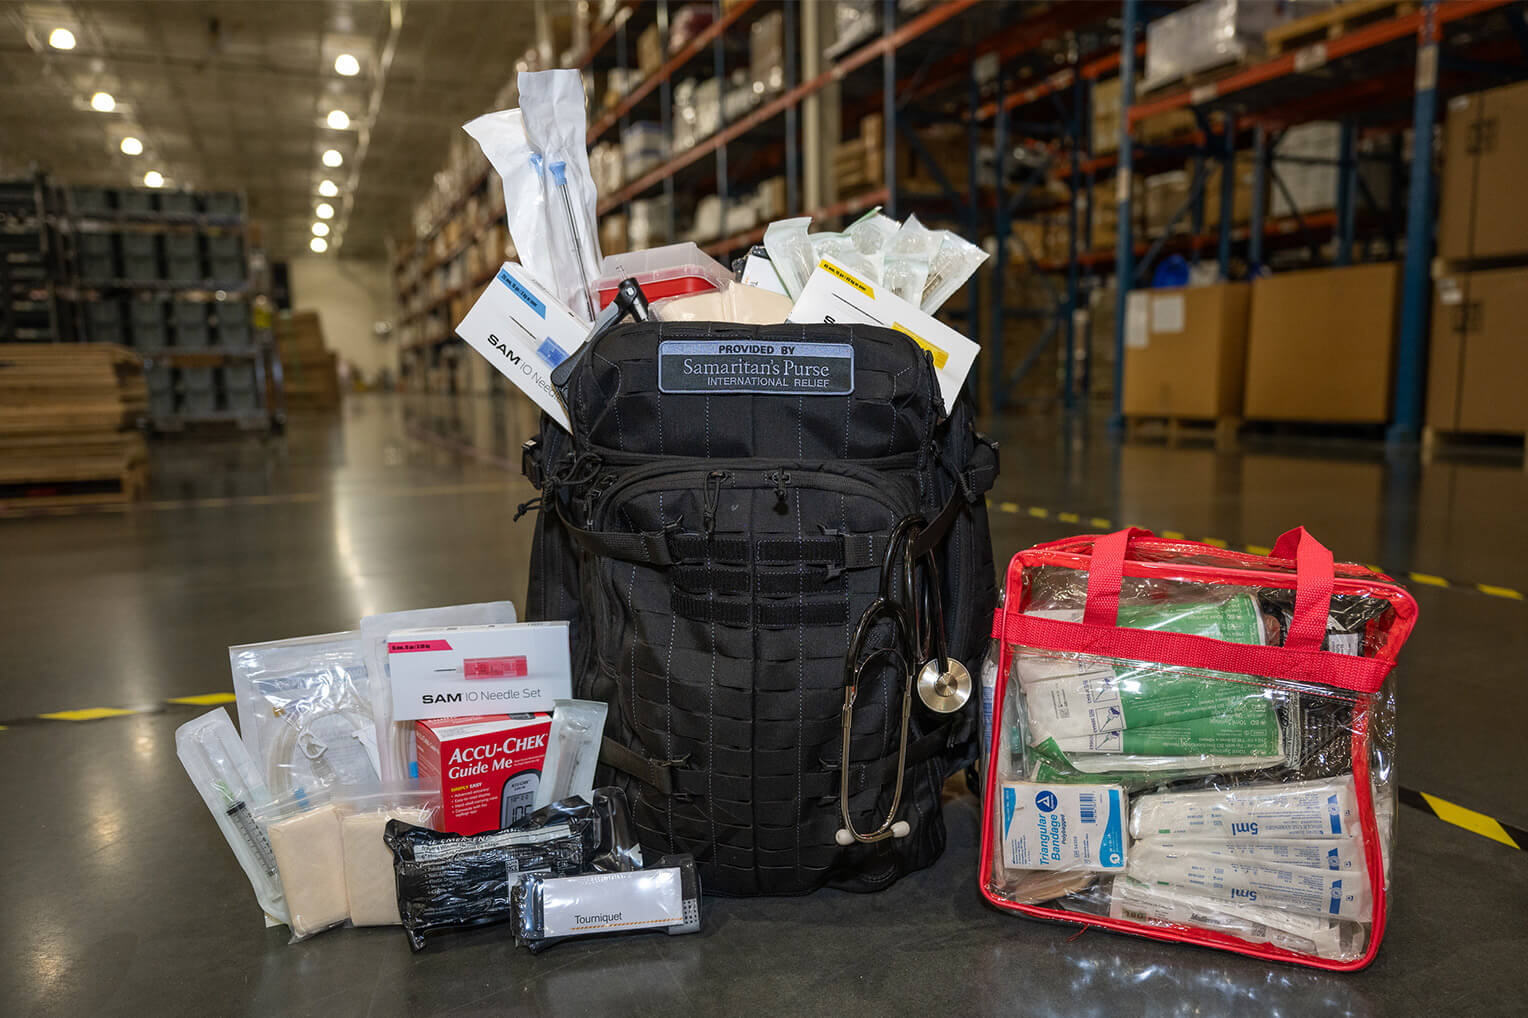 Samaritan's Purse trauma kits are filled with 70 medical items—including a tourniquet, chest tube kit, suture kit, and intubation kit—to equip emergency response professionals.